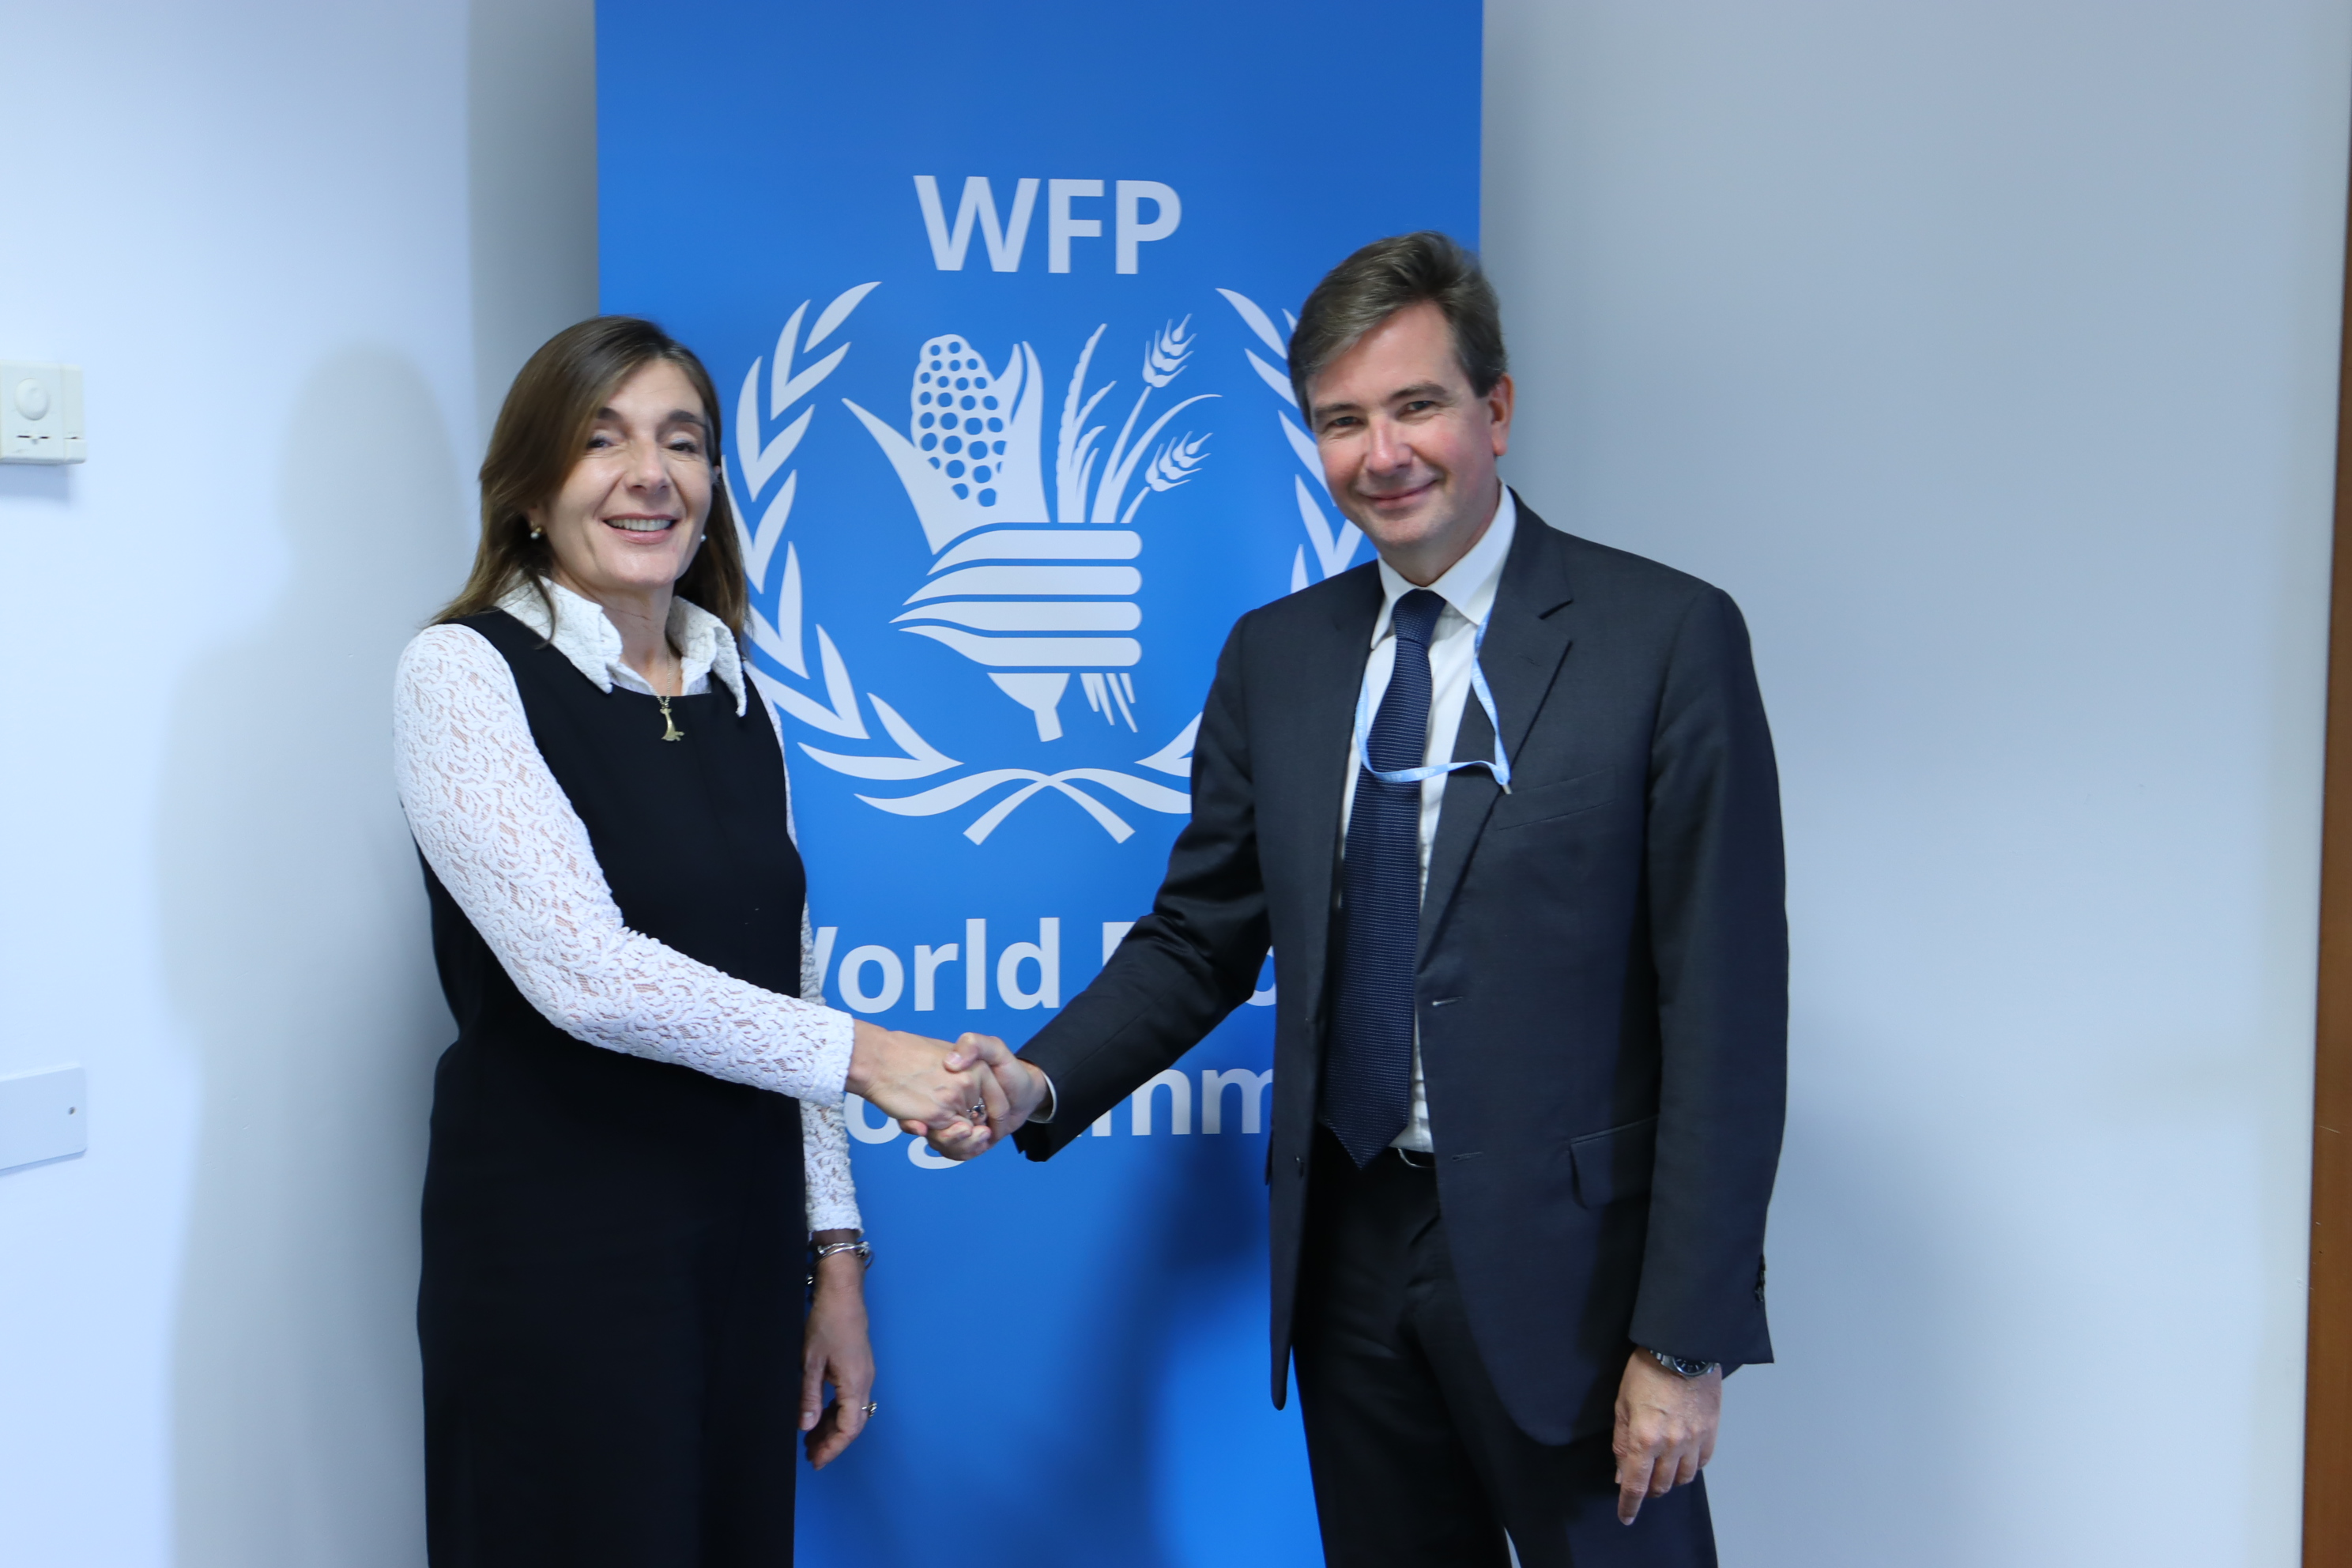 Enrica Porcari, Head of CERN’s Information Technology Department, shaking hands and Dominik Heinrich, Director of Innovation, Change, and Knowledge Management at WFP, in front of a WFP banner